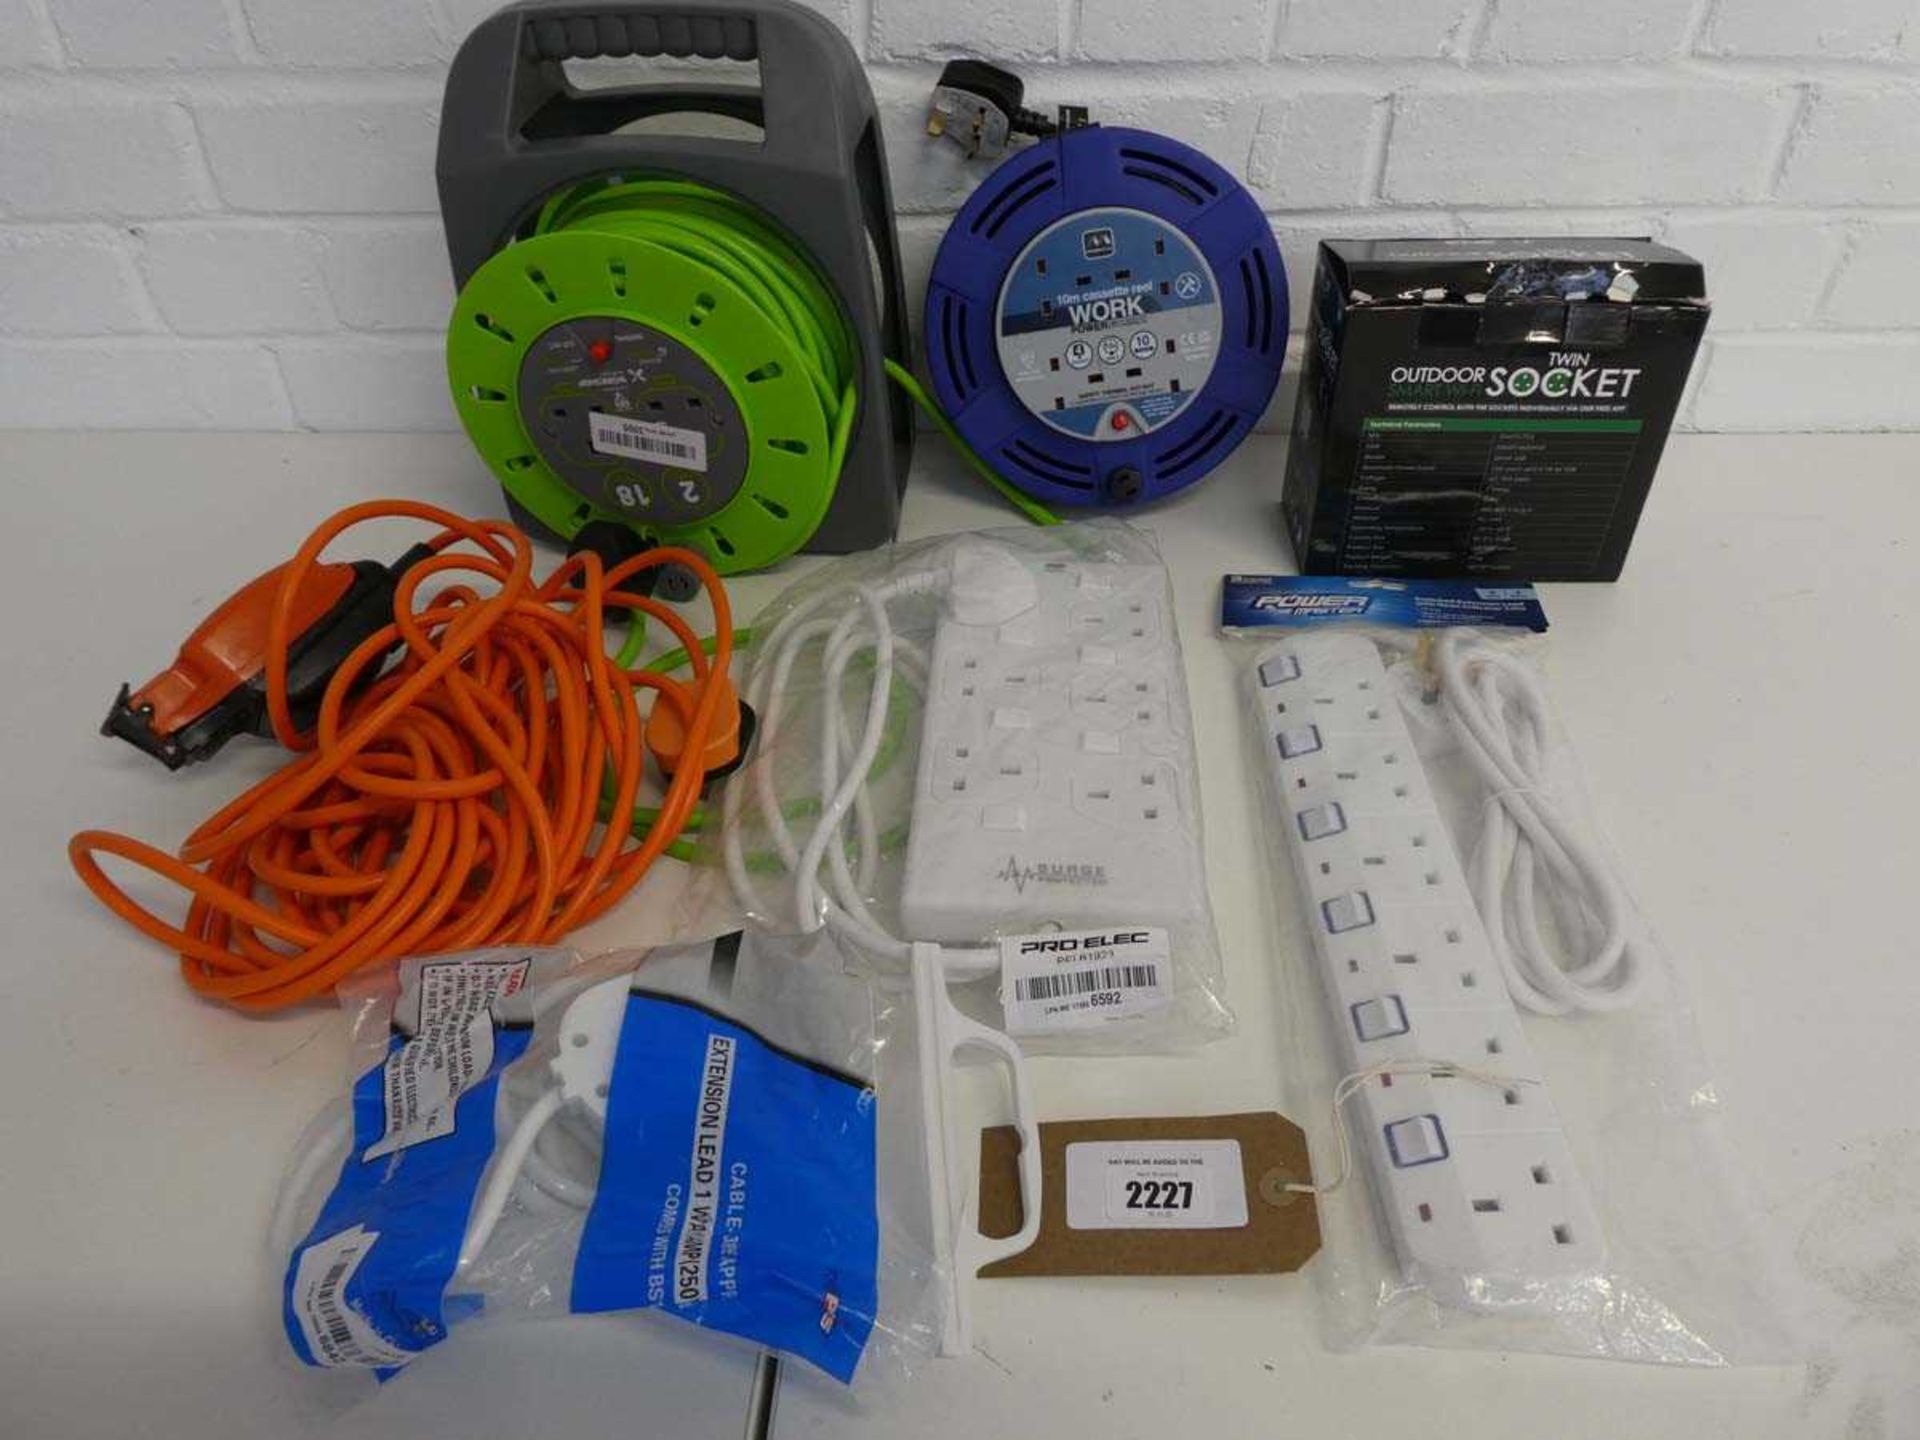 +VAT Bag containing 6 various sized cable reels and extension sockets (80m, 10m etc.), together with